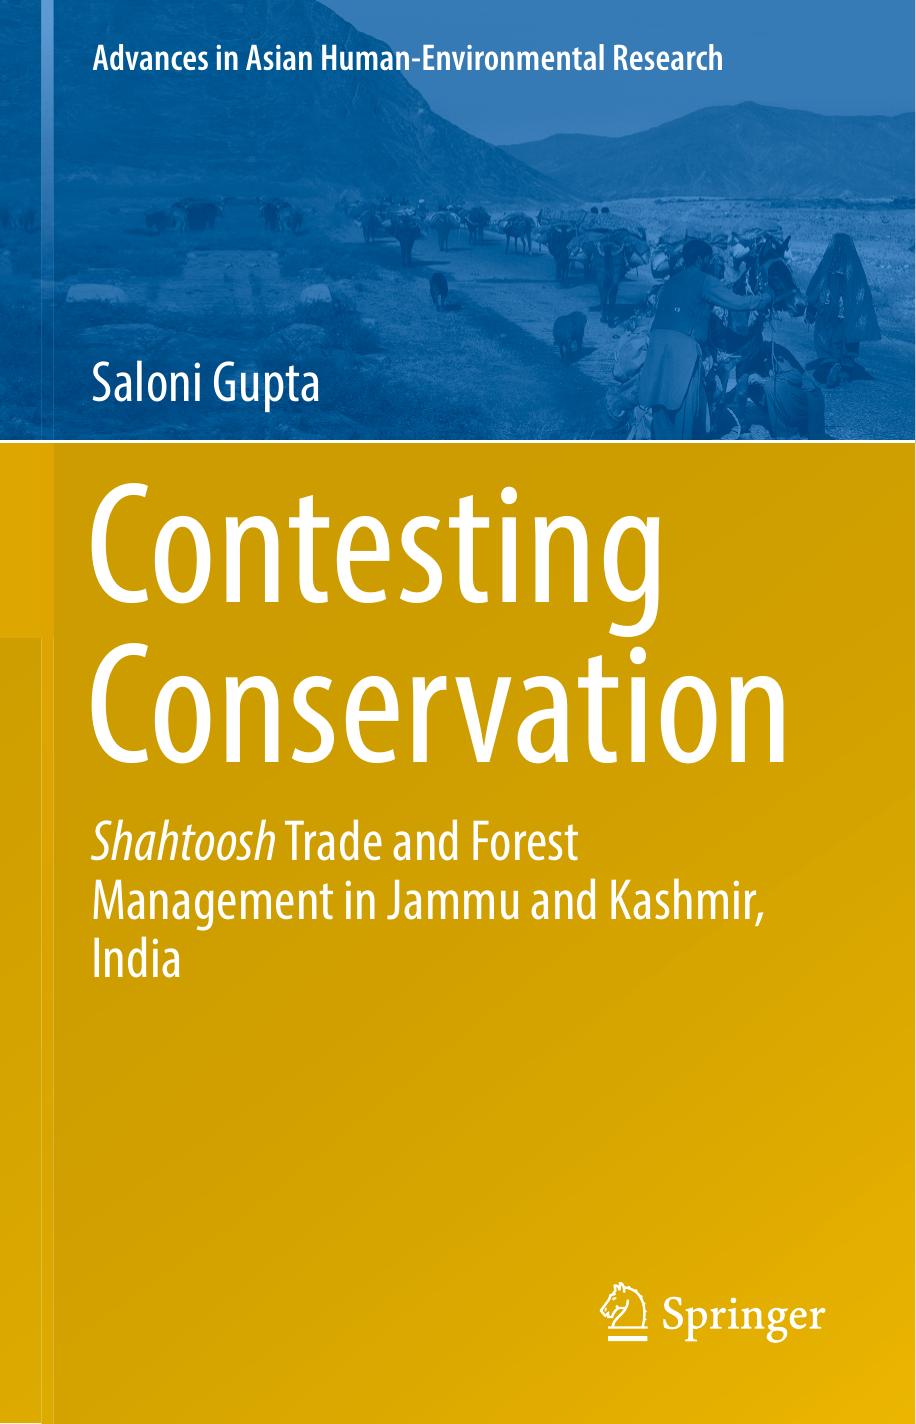 Contesting Conservation Shahtoosh Trade and Forest Management in Jammu and Kashmir, India 2019